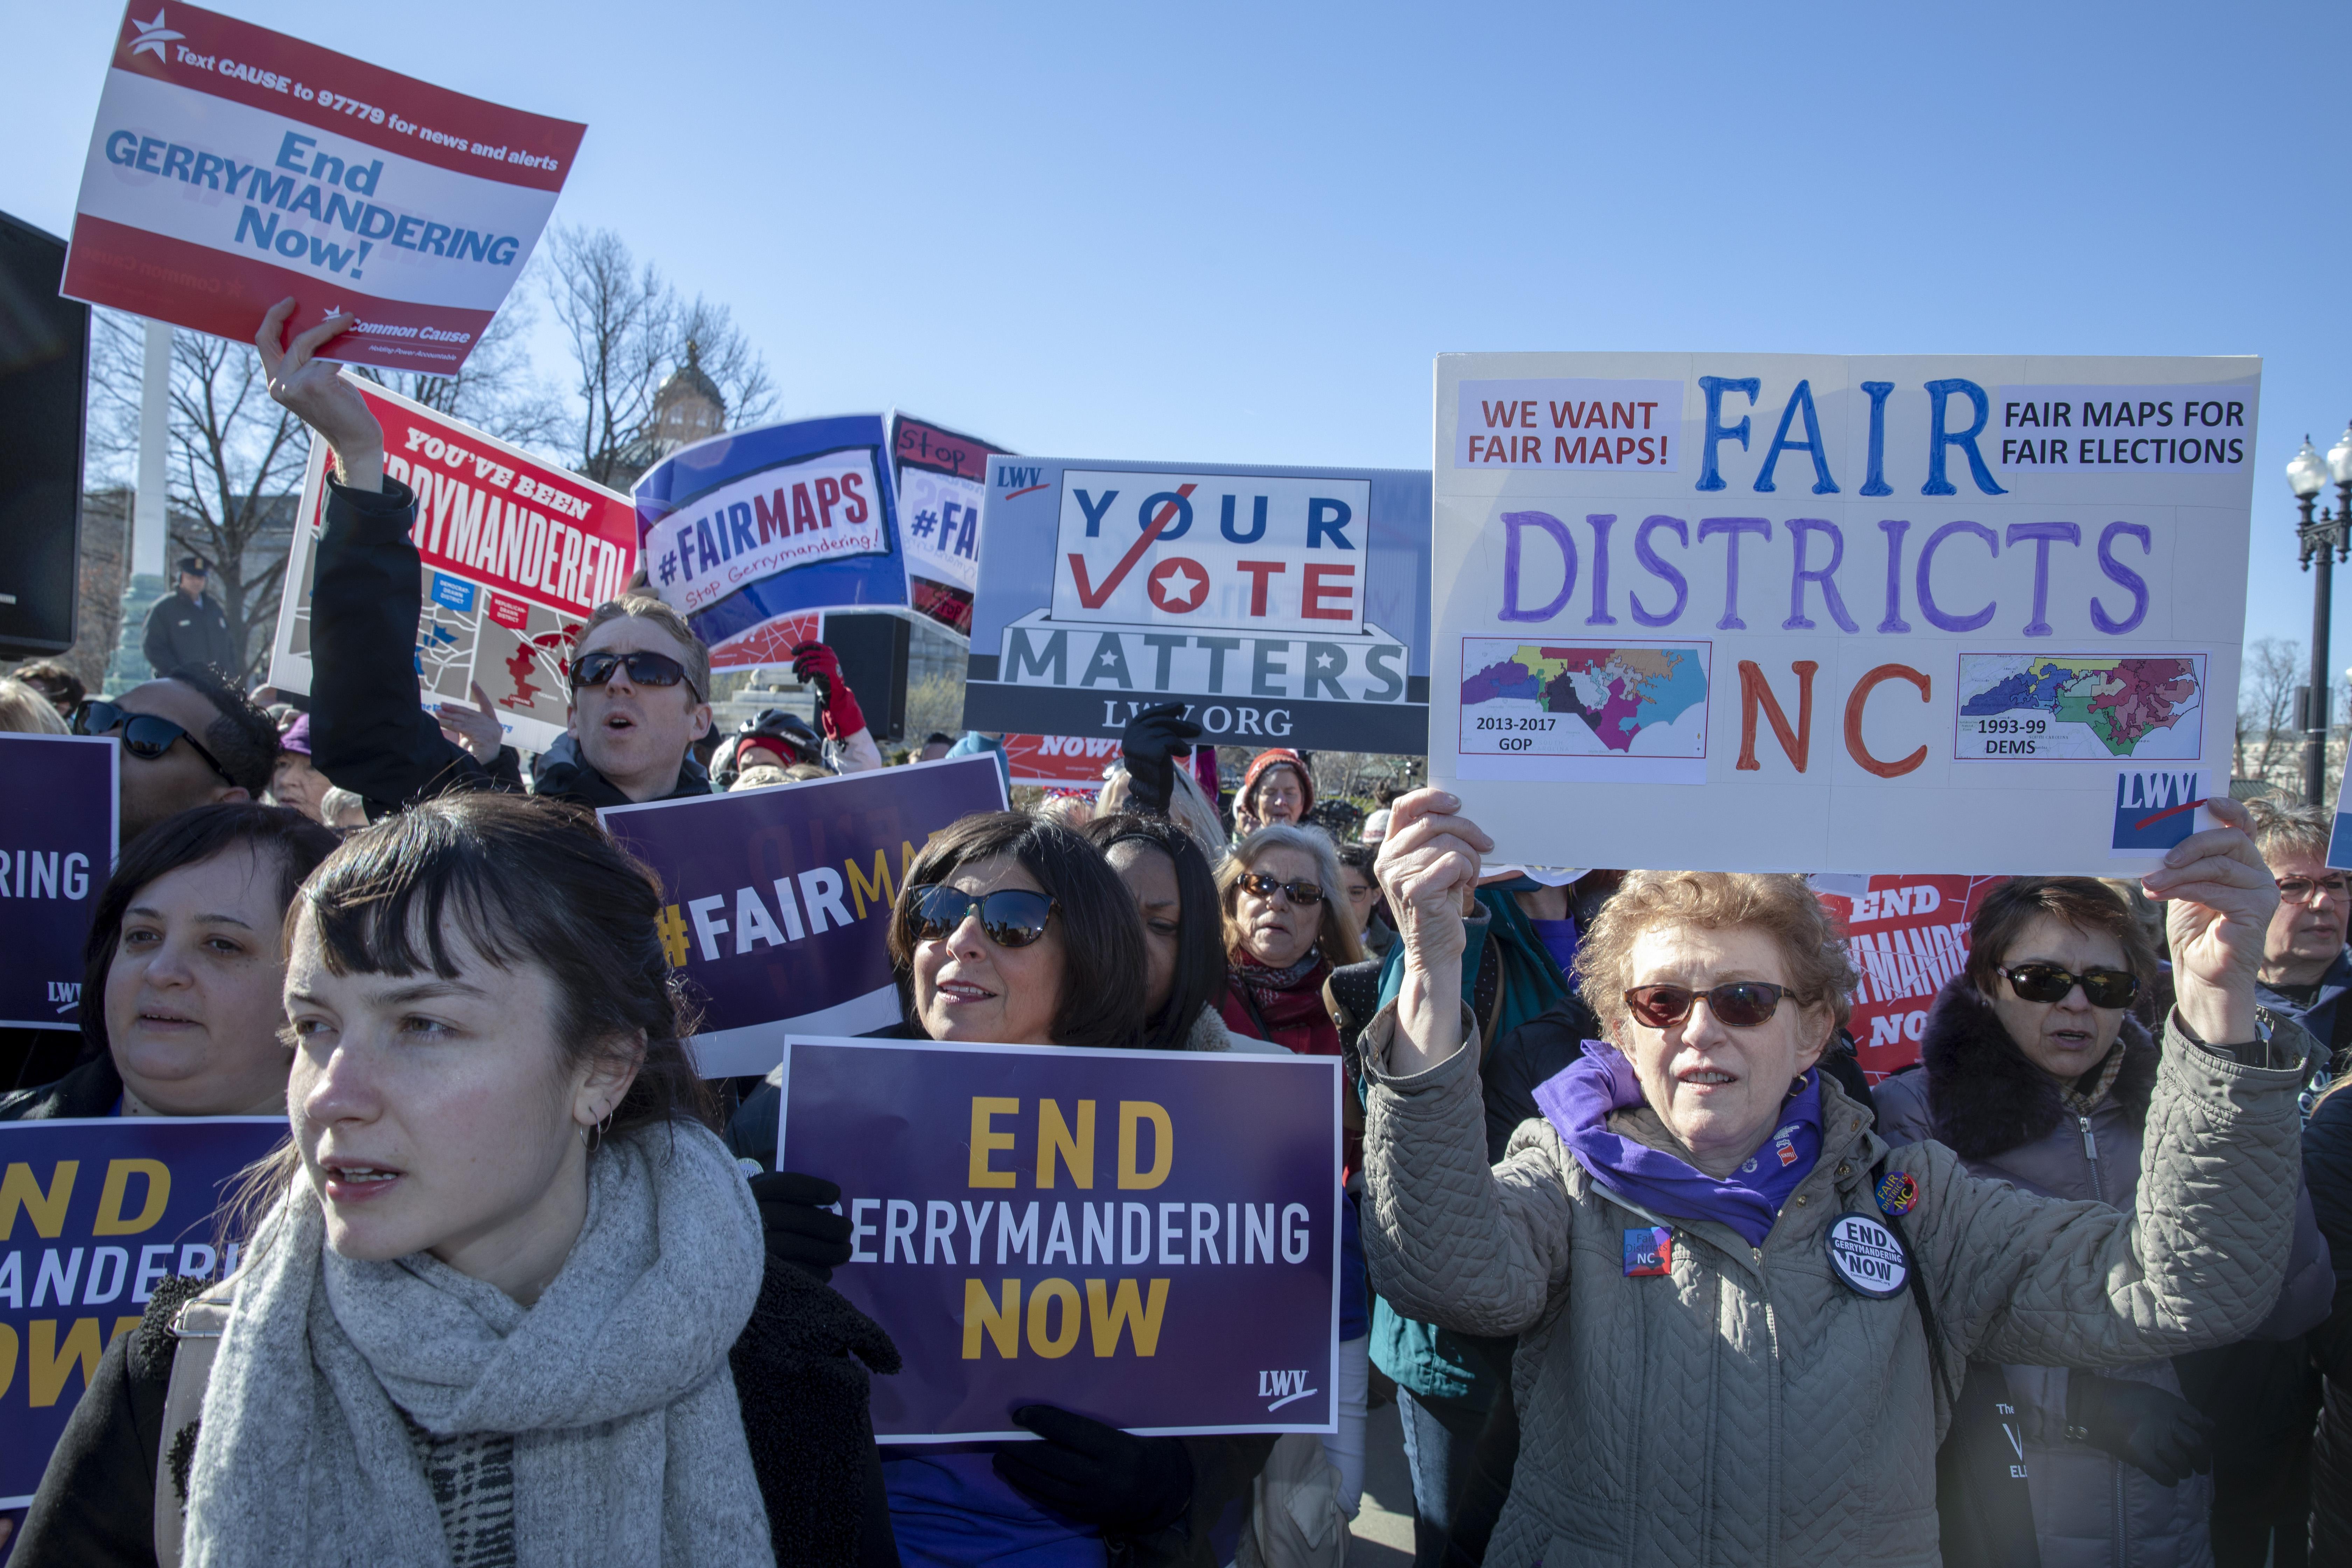 Protesters attends a rally against partisan gerrymandering on March 26, 2019 in Washington, D.C. 